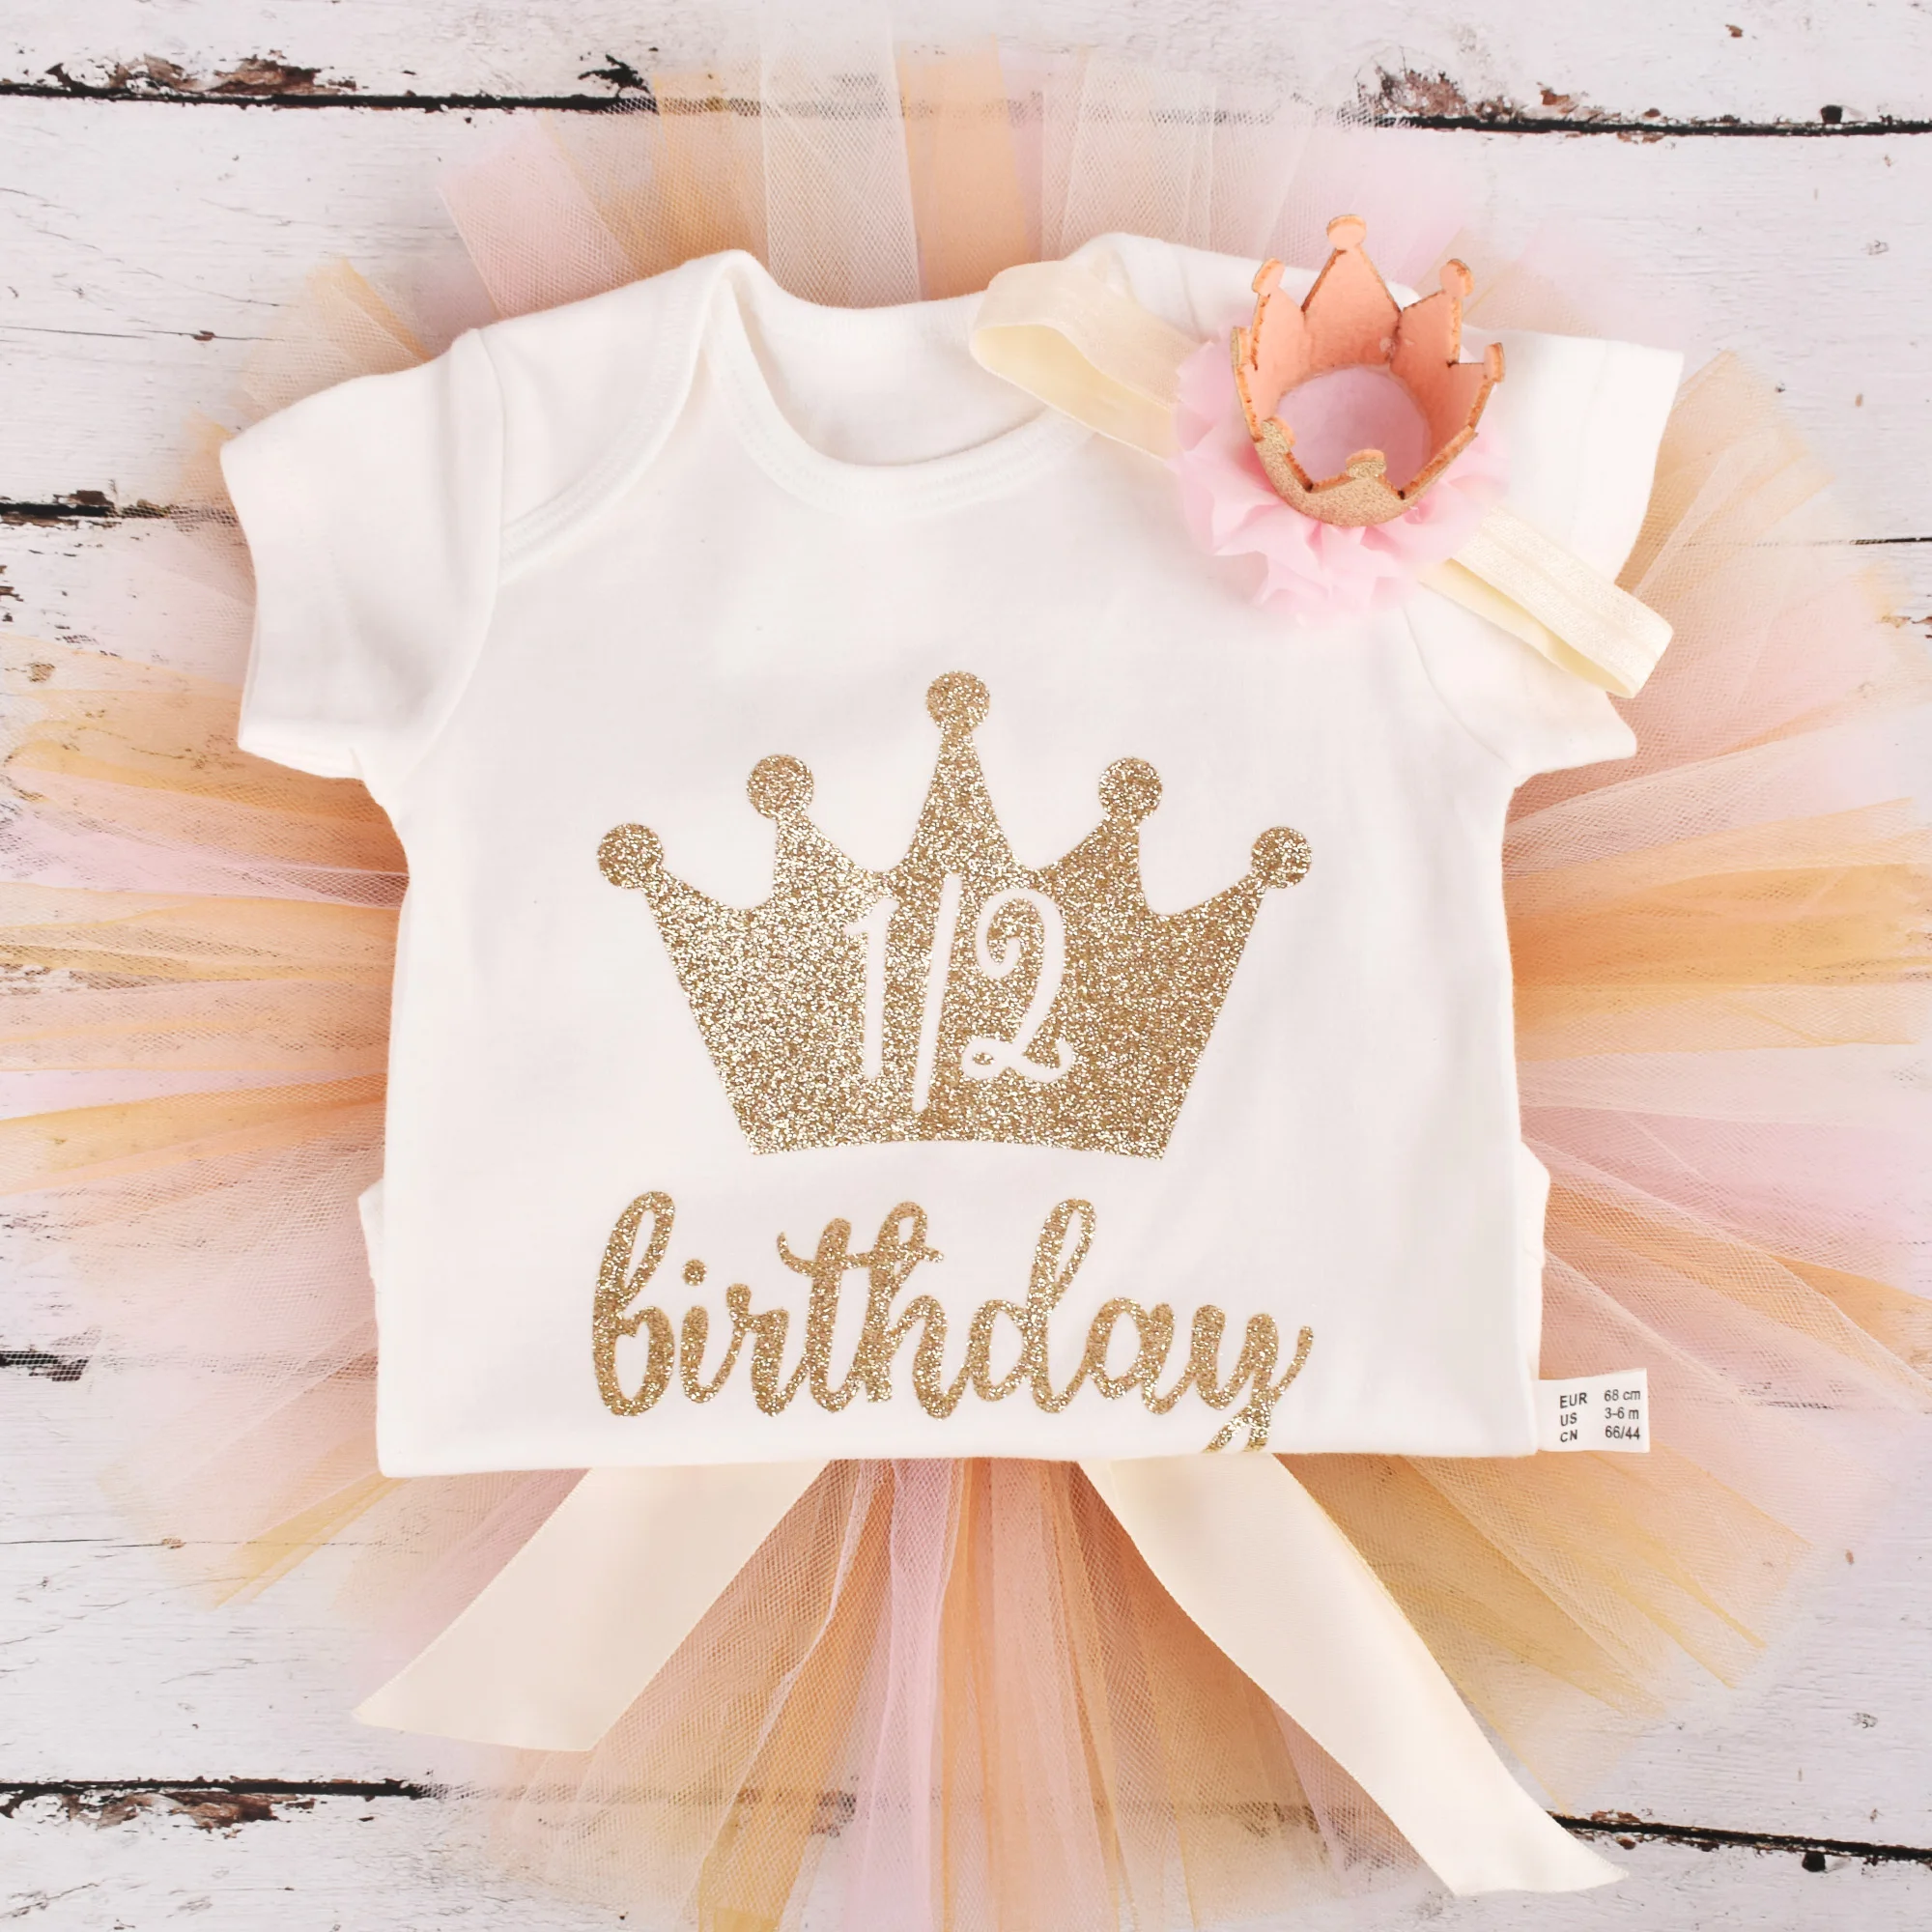 Baby Clothing Set Baby Girls 1/2 year Birthday Outfit Gold Crown Tutu outfits Infant Party Costume Baby Photo Props Clothes Set 4 colors option small baby clothing set	 Baby Clothing Set